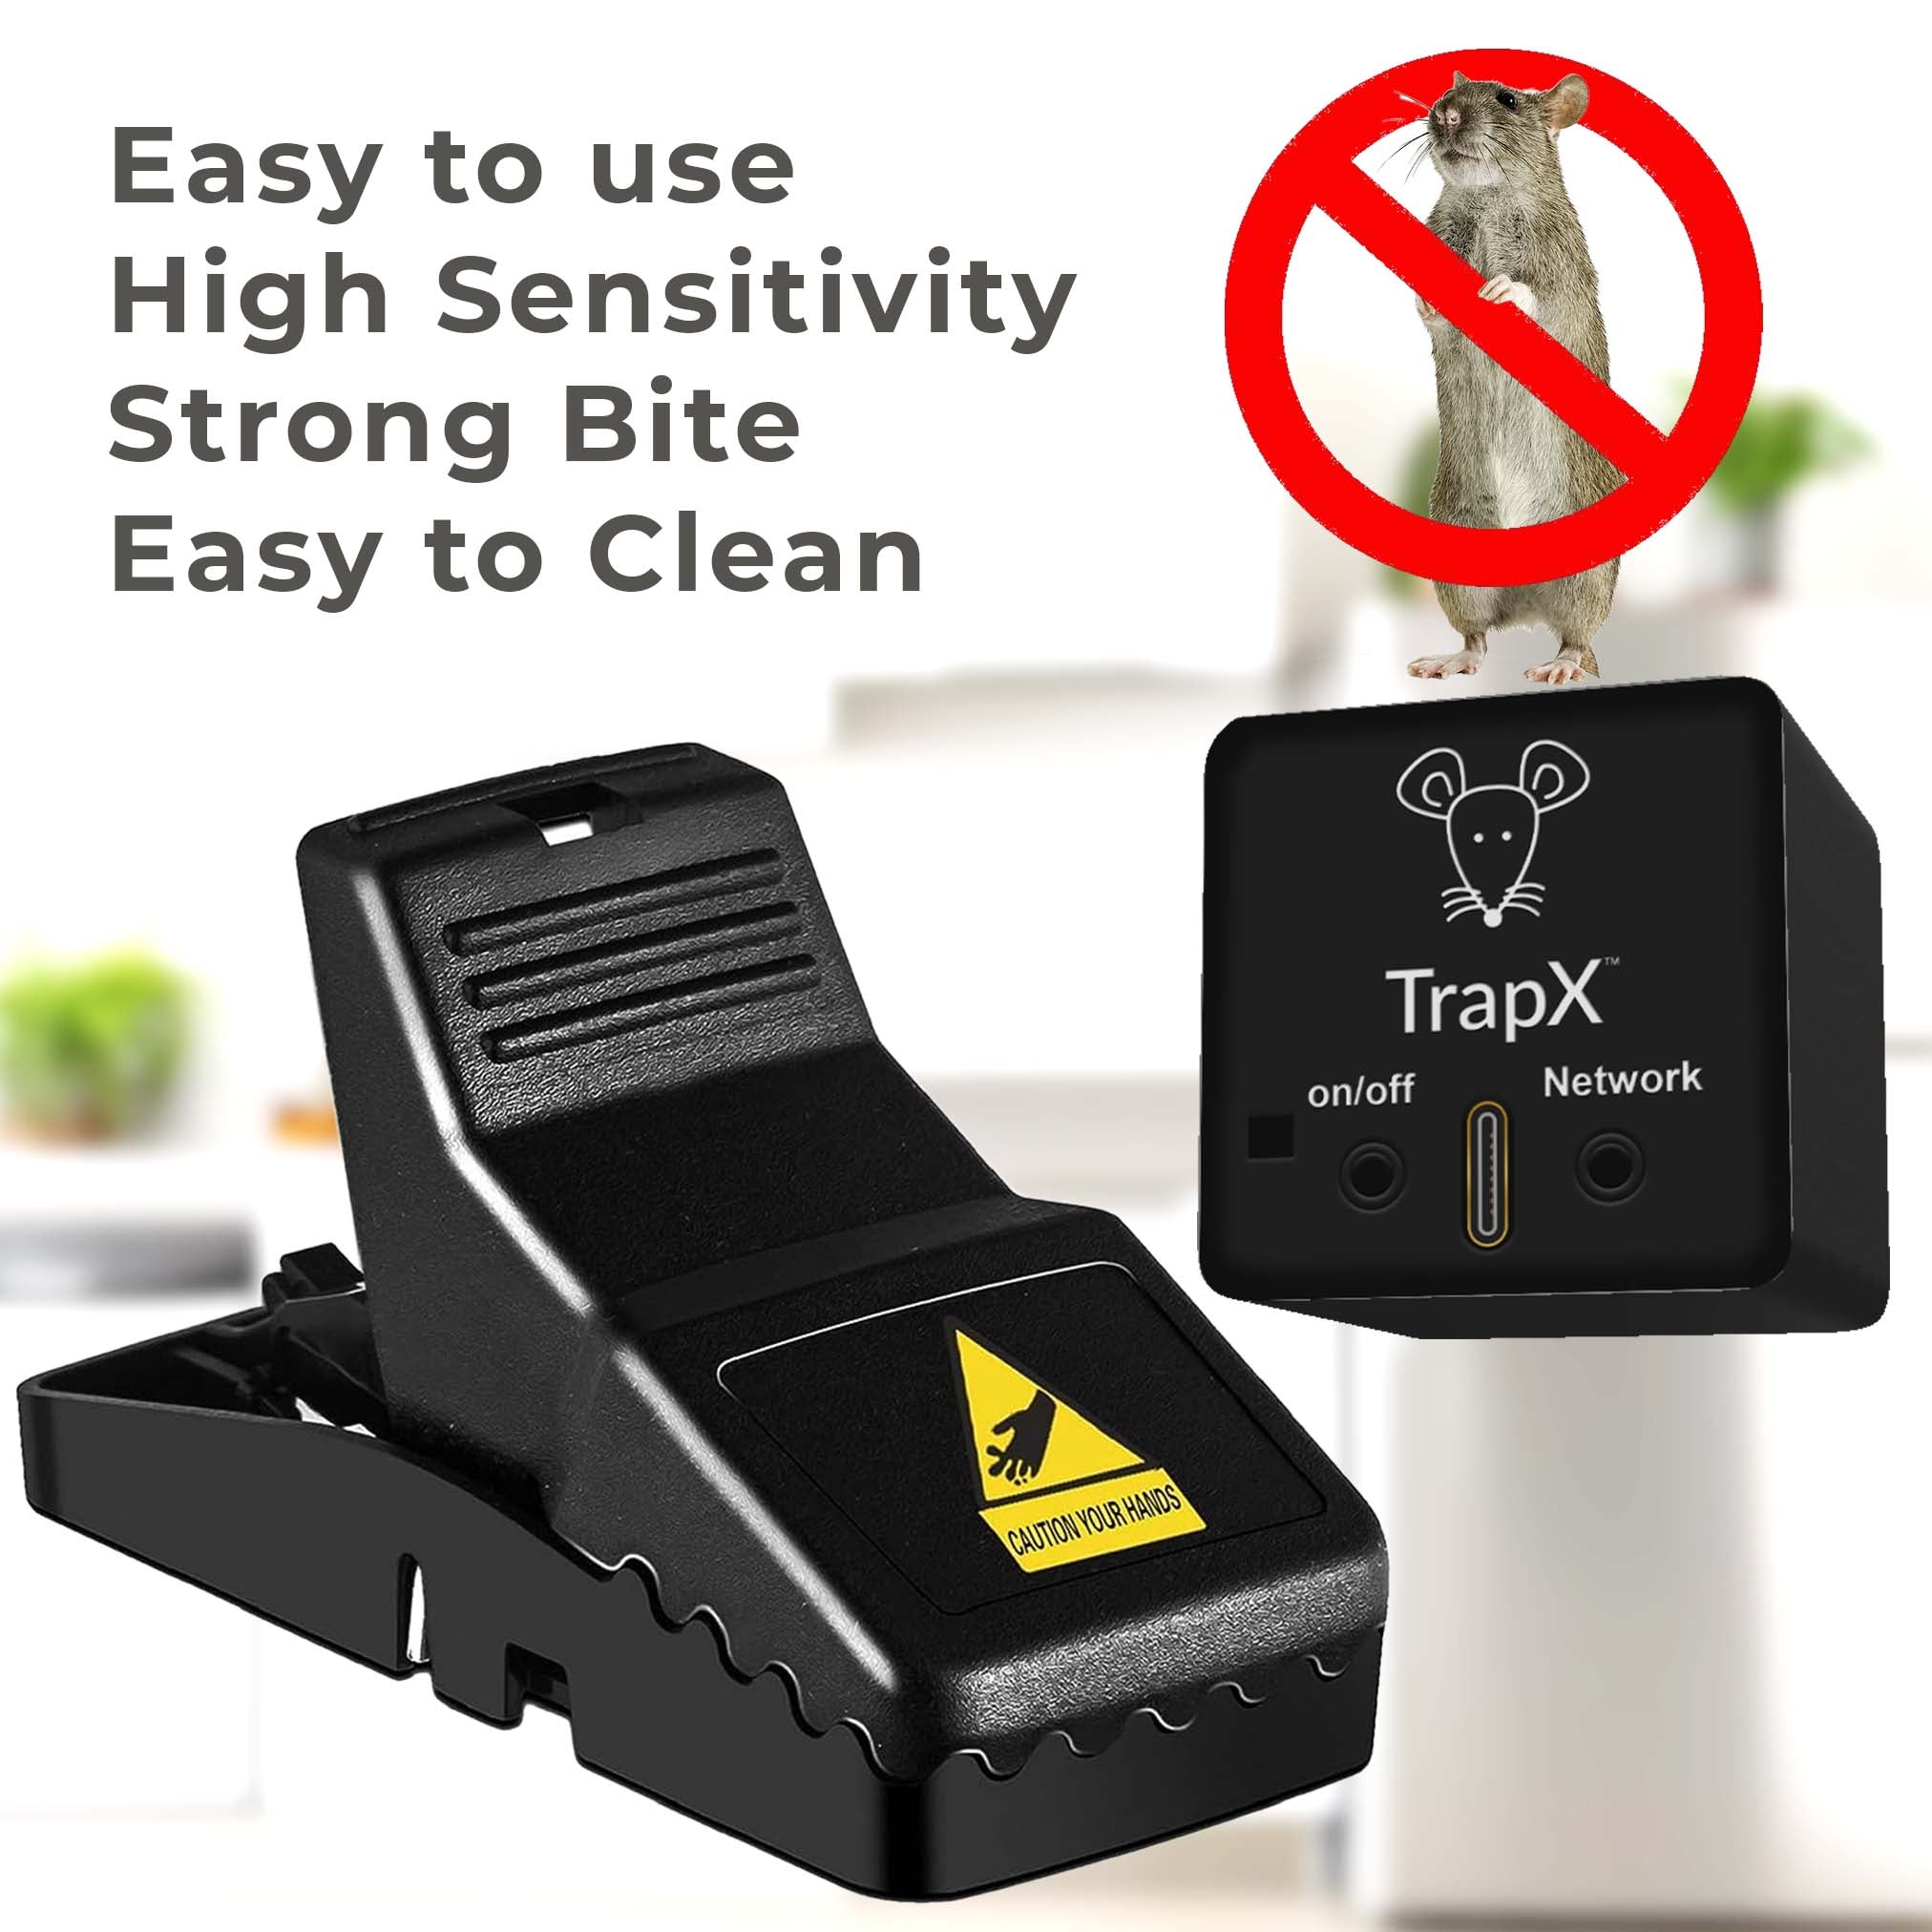 Revolutionizing Pest Control: The Mouse Trap with Wireless Alert